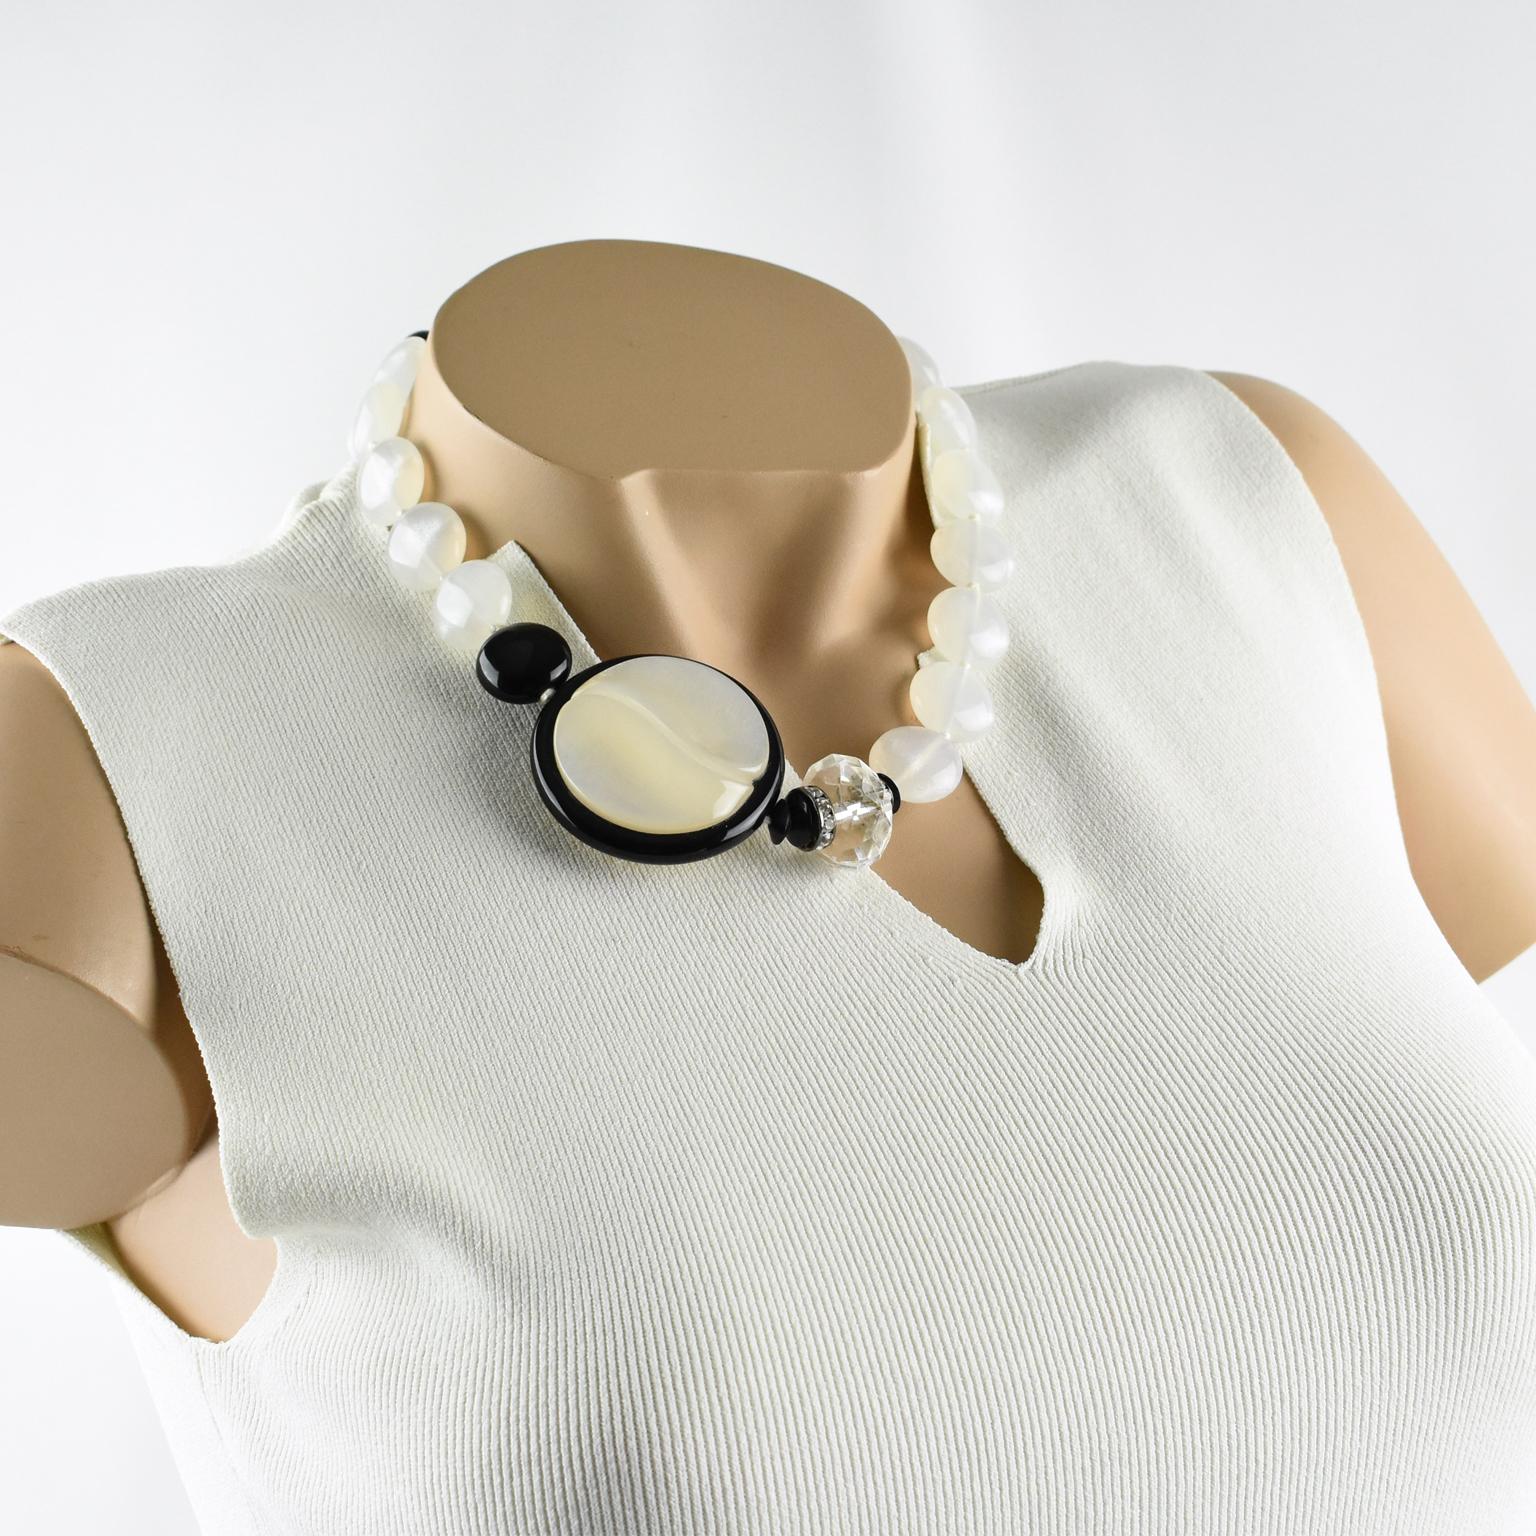 This elegant Angela Caputi, made in Italy resin choker beaded necklace, works with black and white contrast. The necklace features assorted beads and a side medallion. It is built with white opalescent round beads, a single black bead, and a large